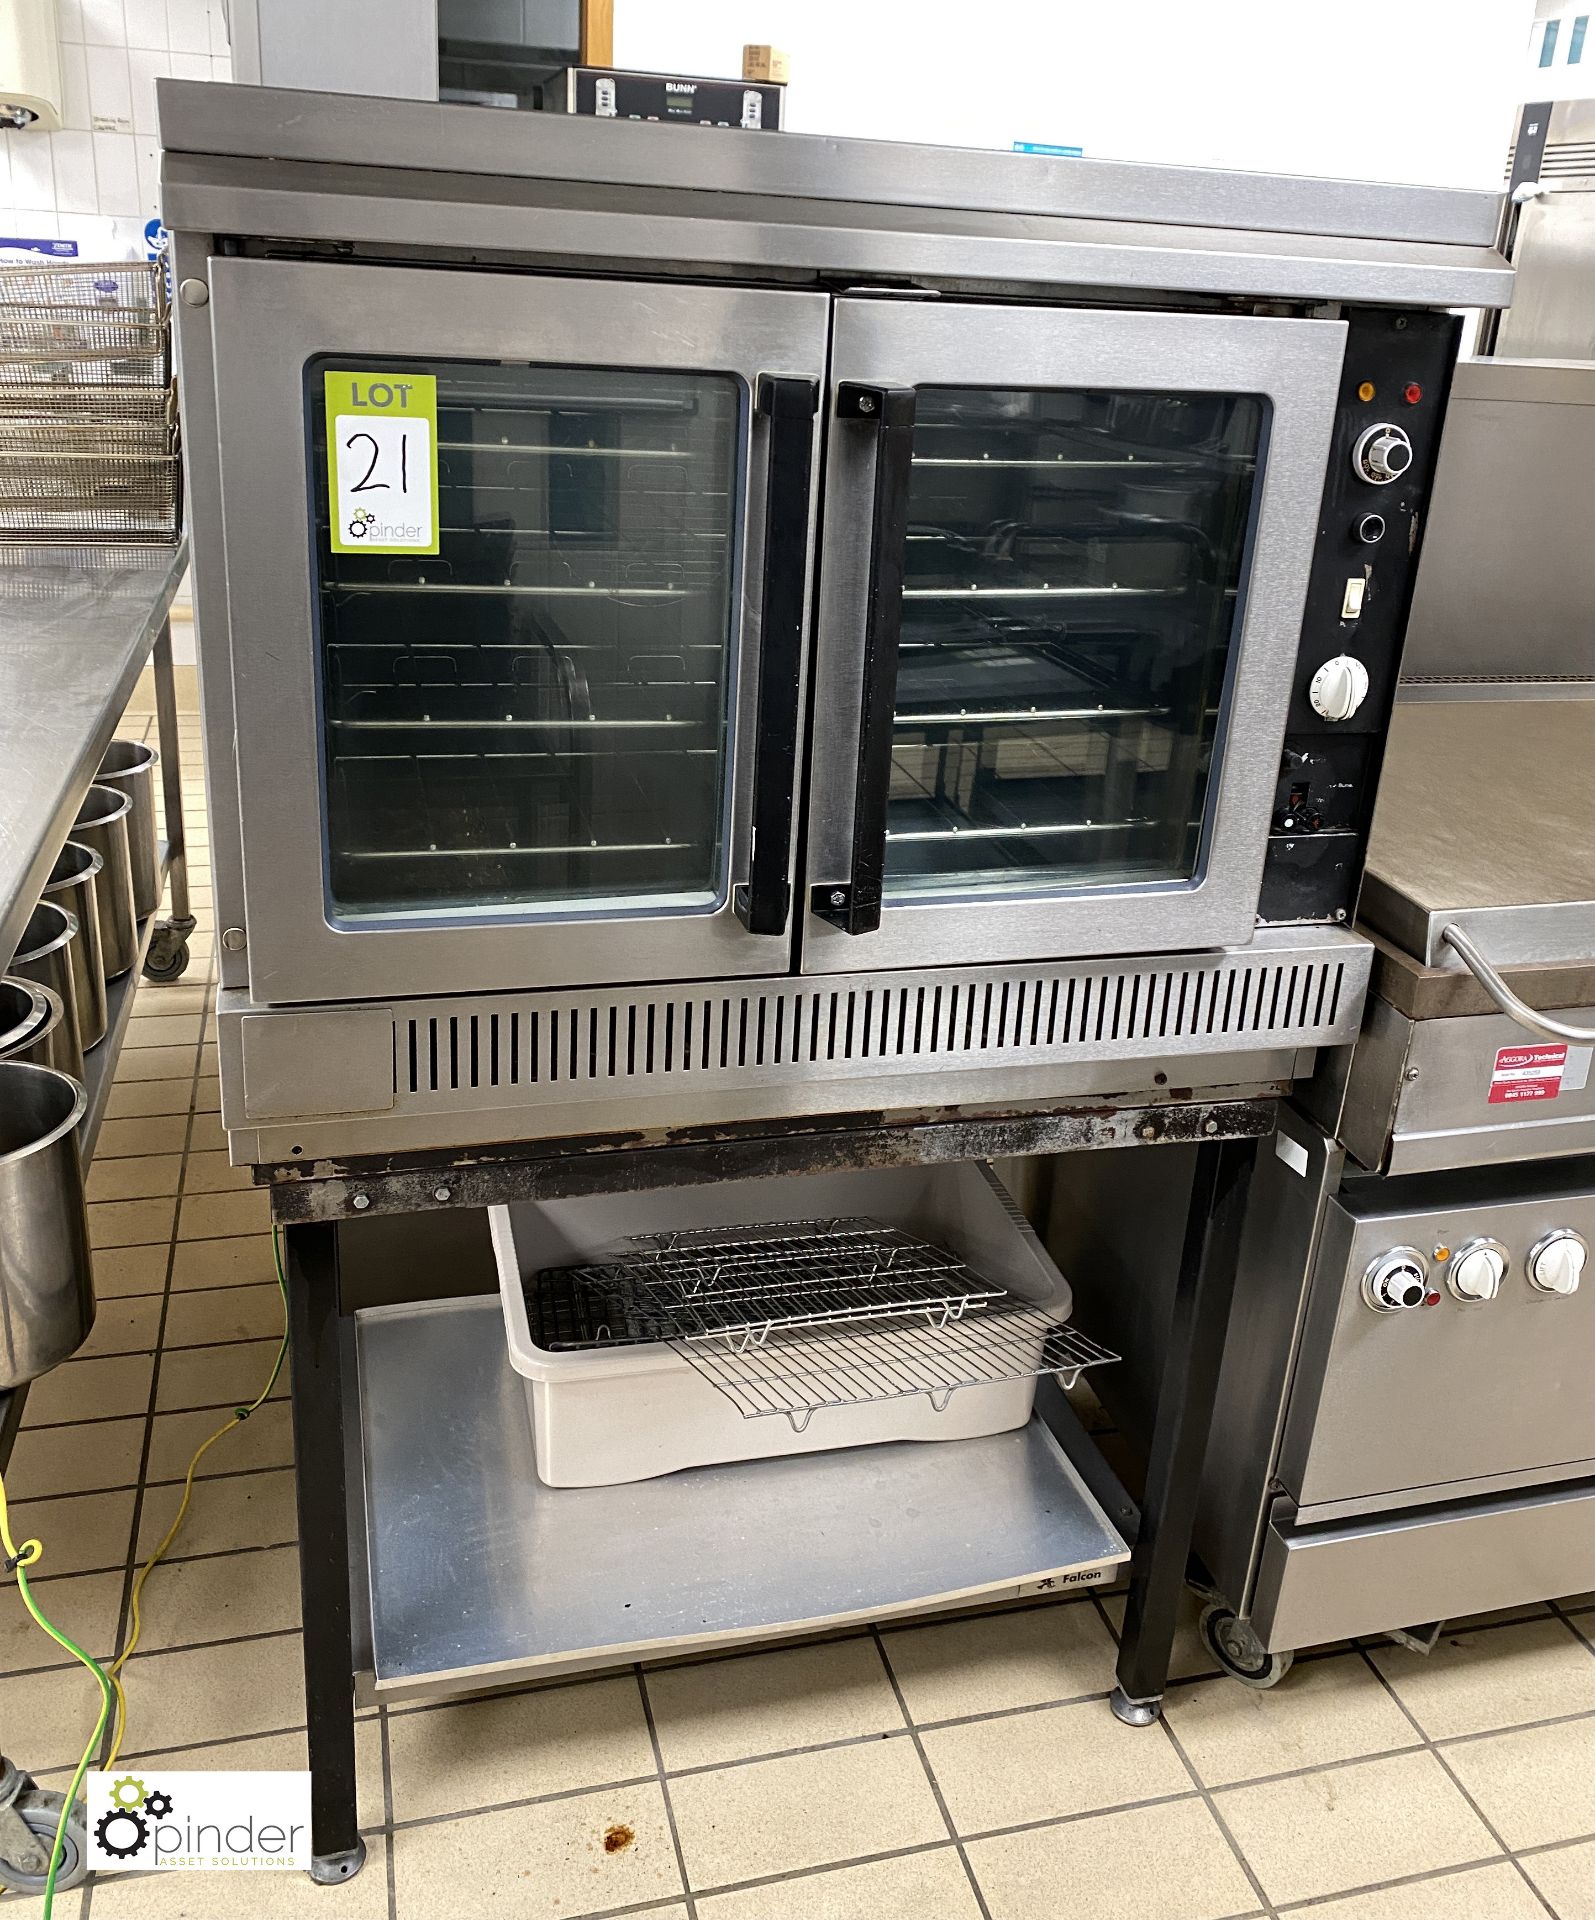 Falcon G112 Fan Oven, 230volts, with stand, 900mm wide x 800mm deep x 1460mm high inc stand - Image 3 of 5